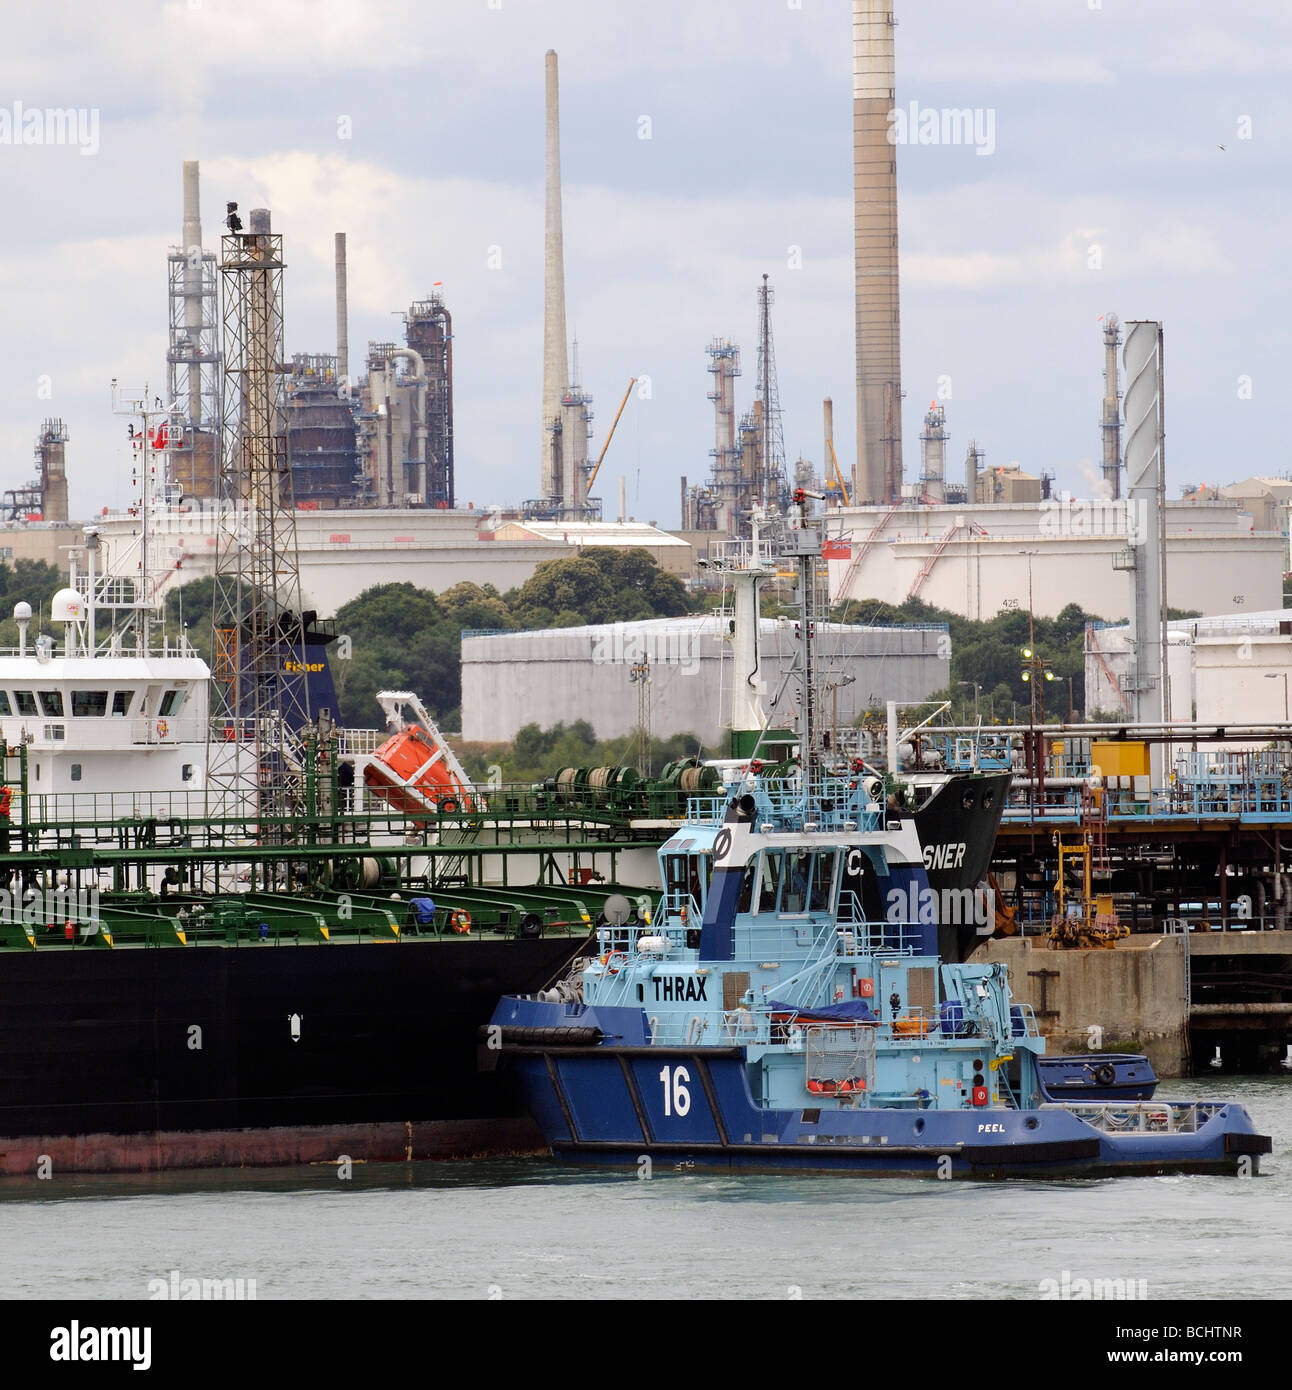 Marine Terminal Fawley Southampton England UK the oil tanker T C Gleisner being moved into position by docking tugs Stock Photo